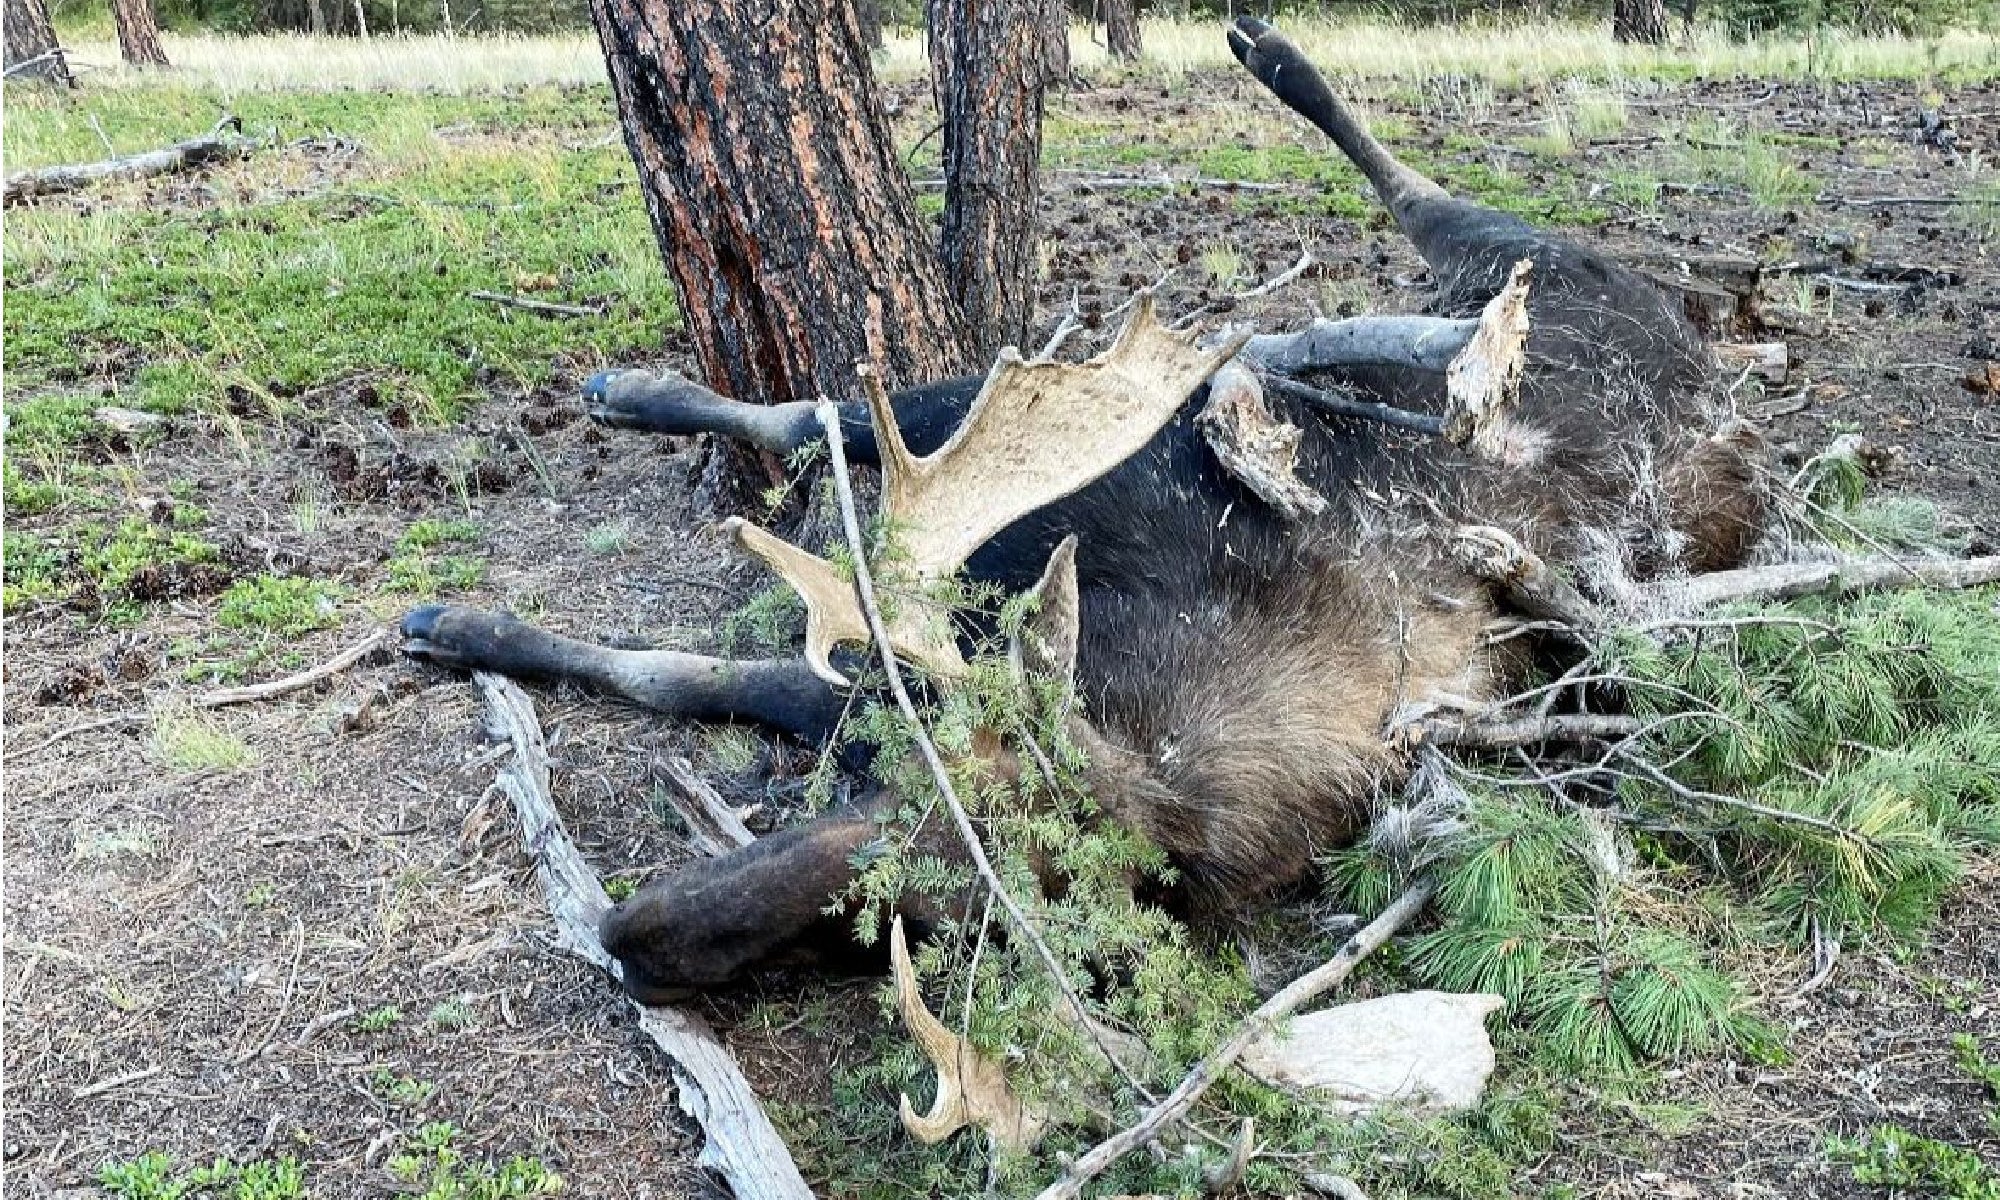 poached moose covered in tree branches